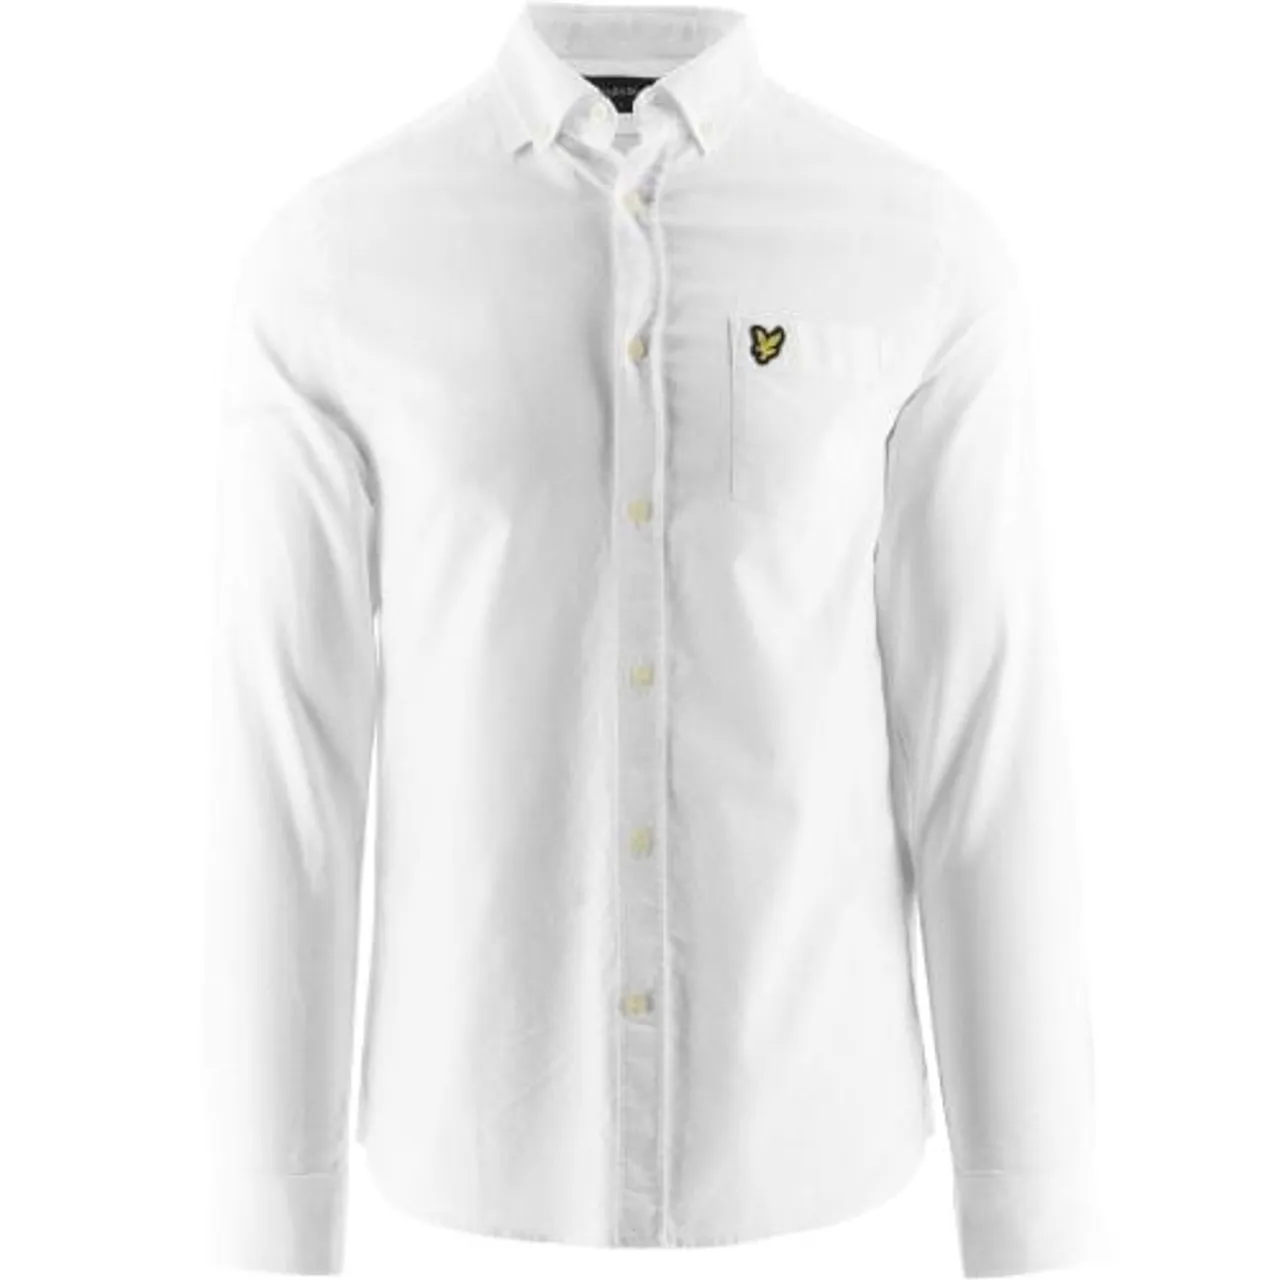 Lyle and Scott Mens White Light Weight Oxford Shirt